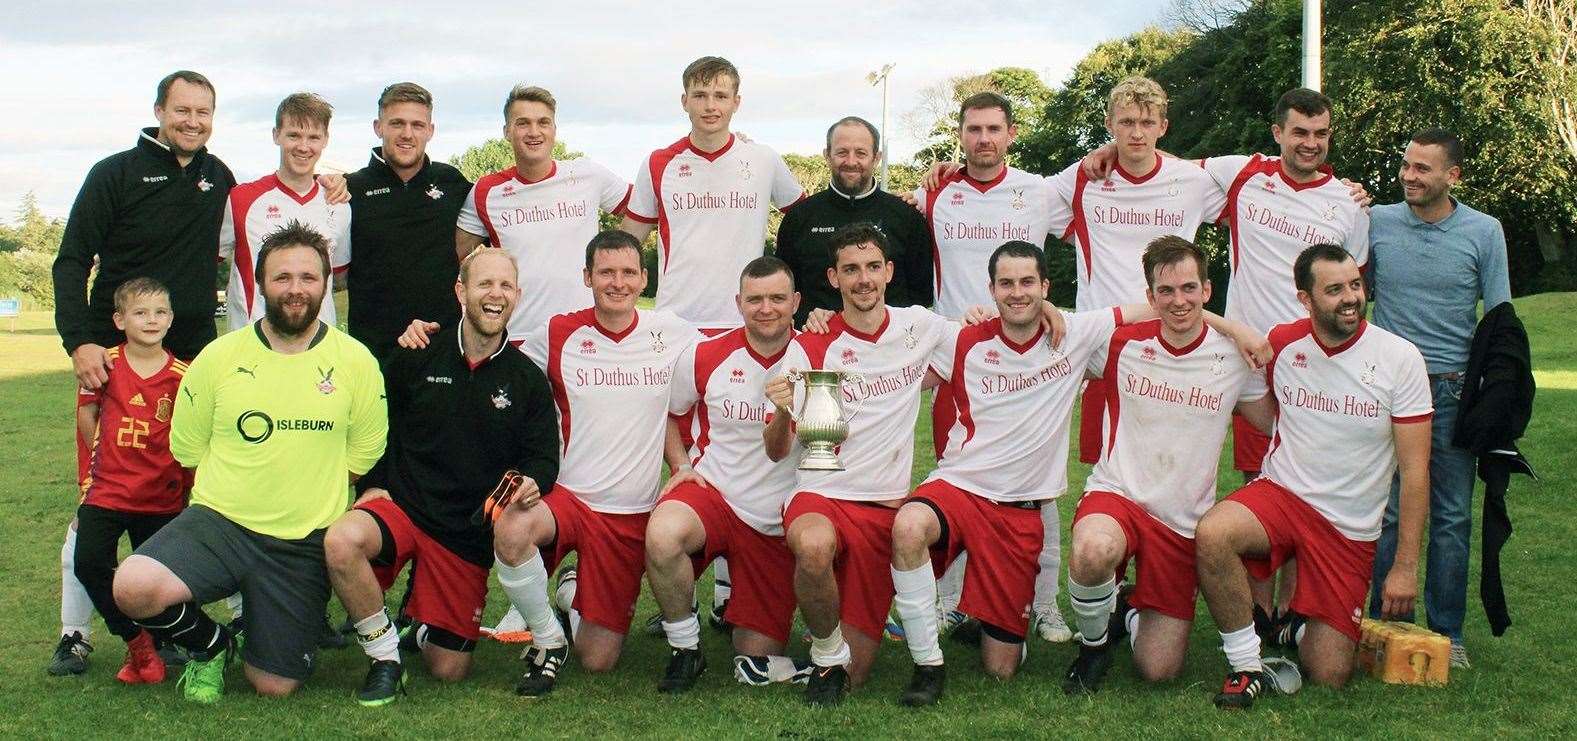 Tain Thistle won the North West Sutherland League in 2018 and 2019.